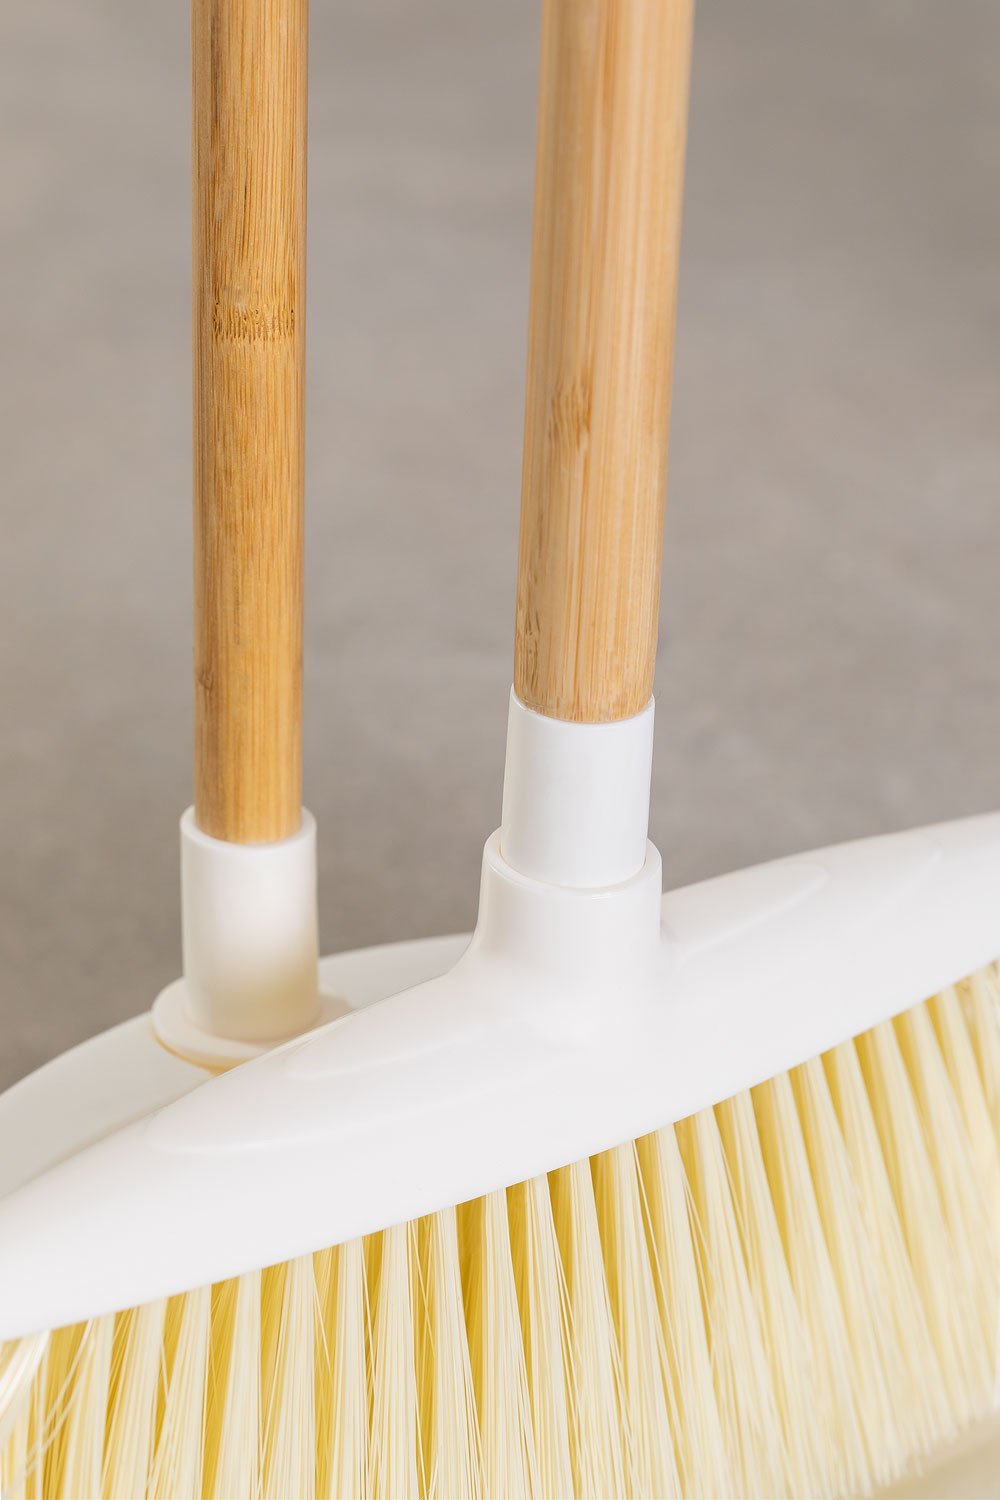 14+ Wooden Broom And Dustpan